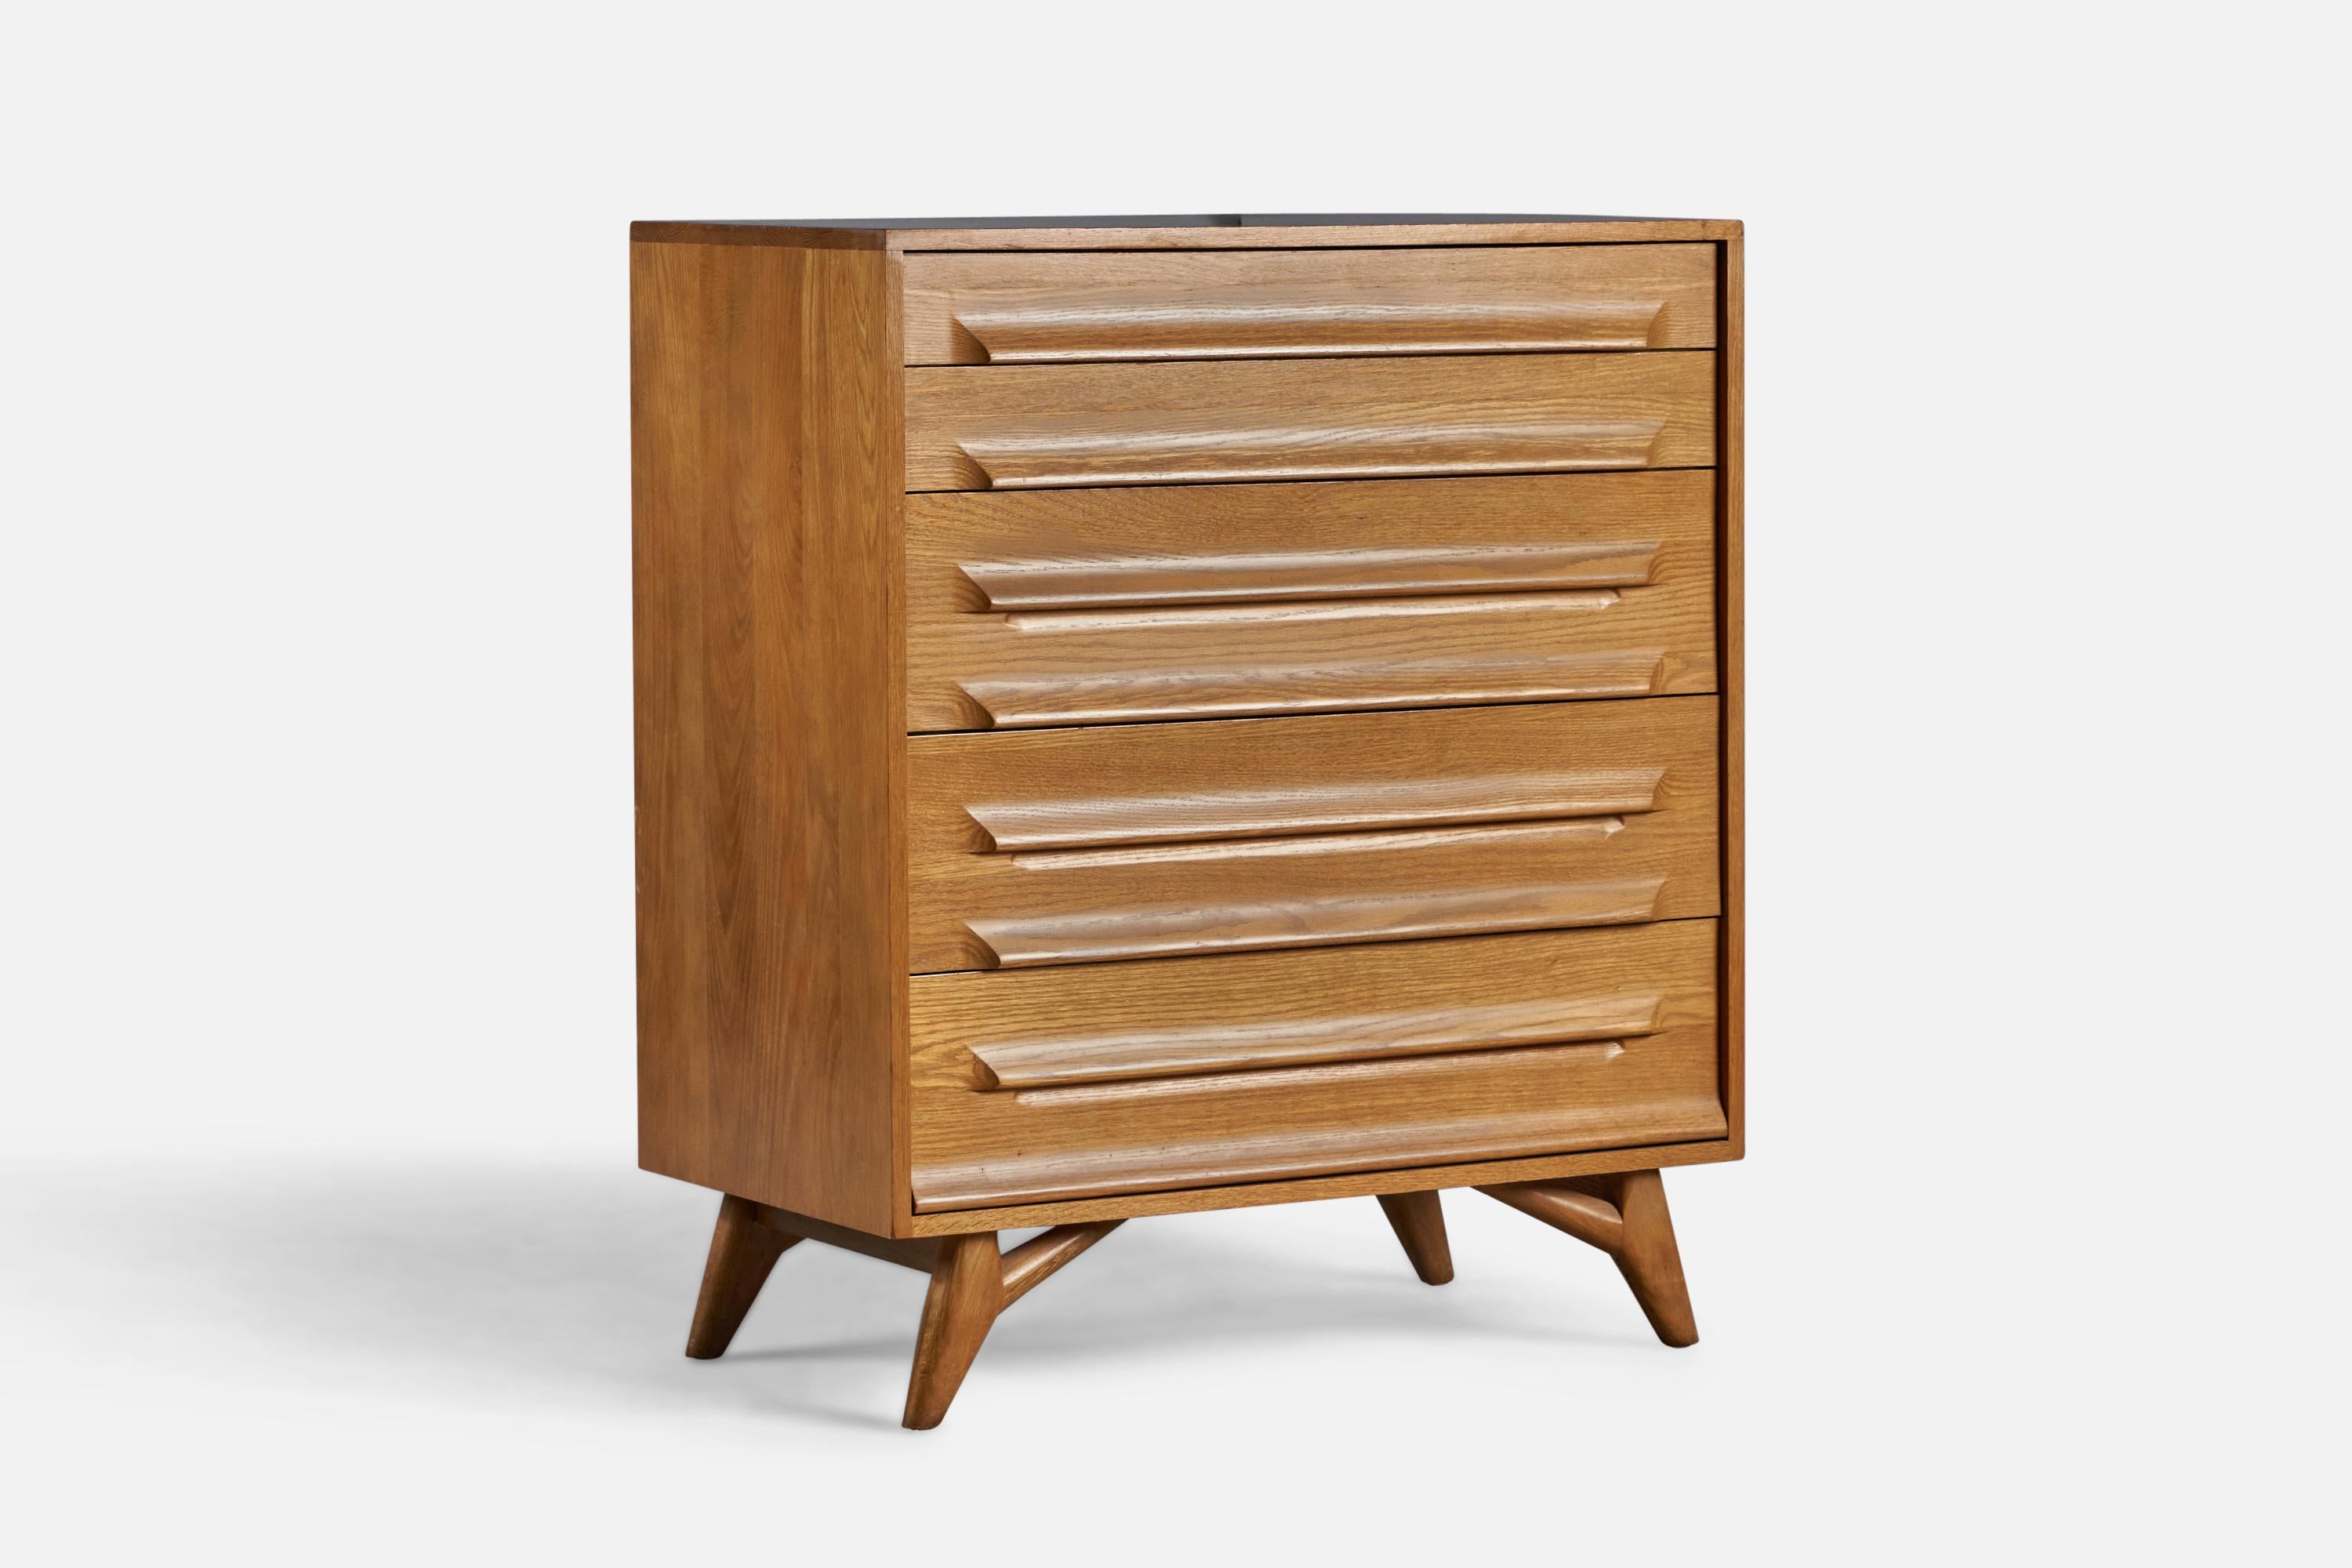 An oak chest of drawers designed by Jack Van Der Molen and produced by Jamestown Lounge Co, USA, 1950s.